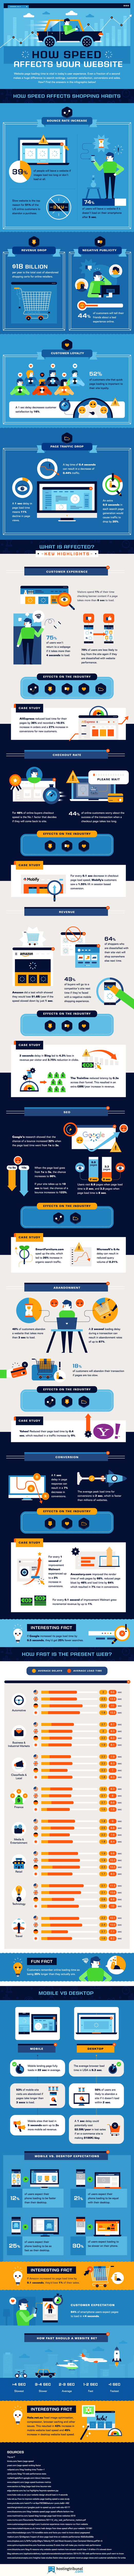 Mistakes With Your Website | Website speed Infographic